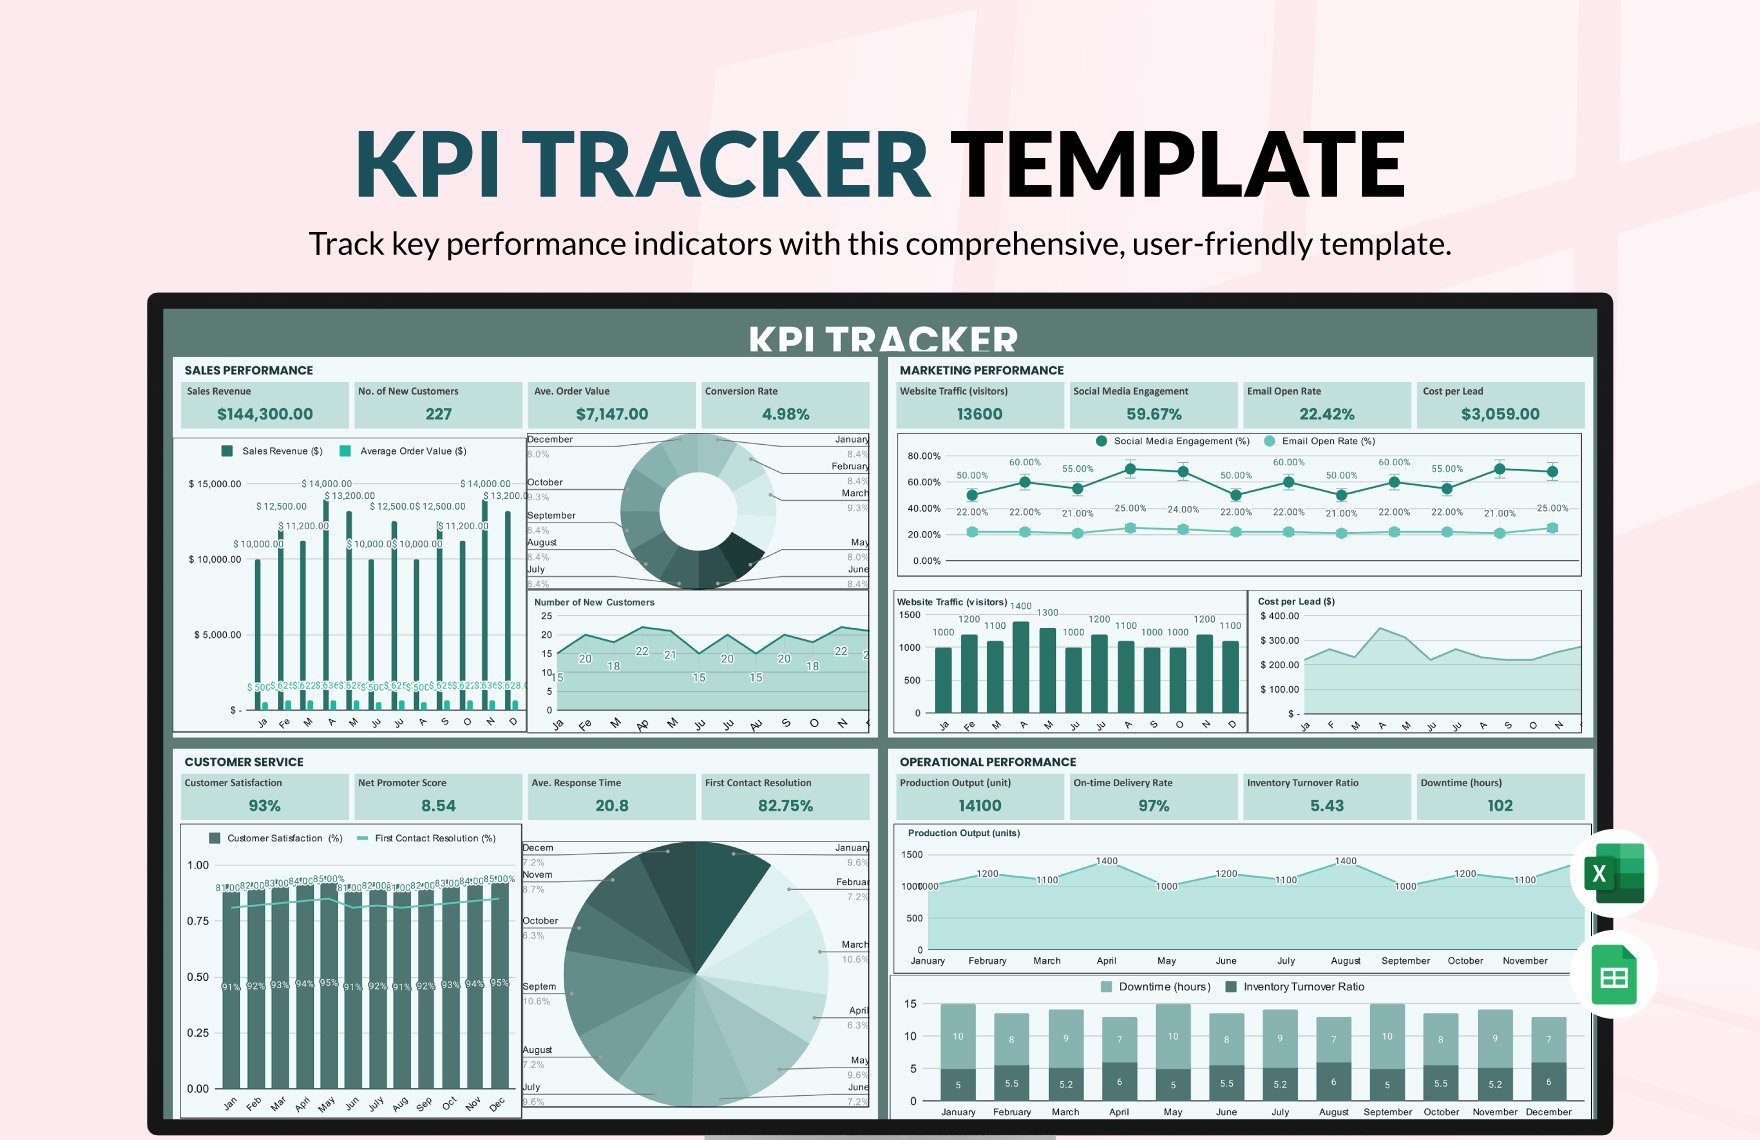 KPI Tracker Template in Excel, Google Sheets